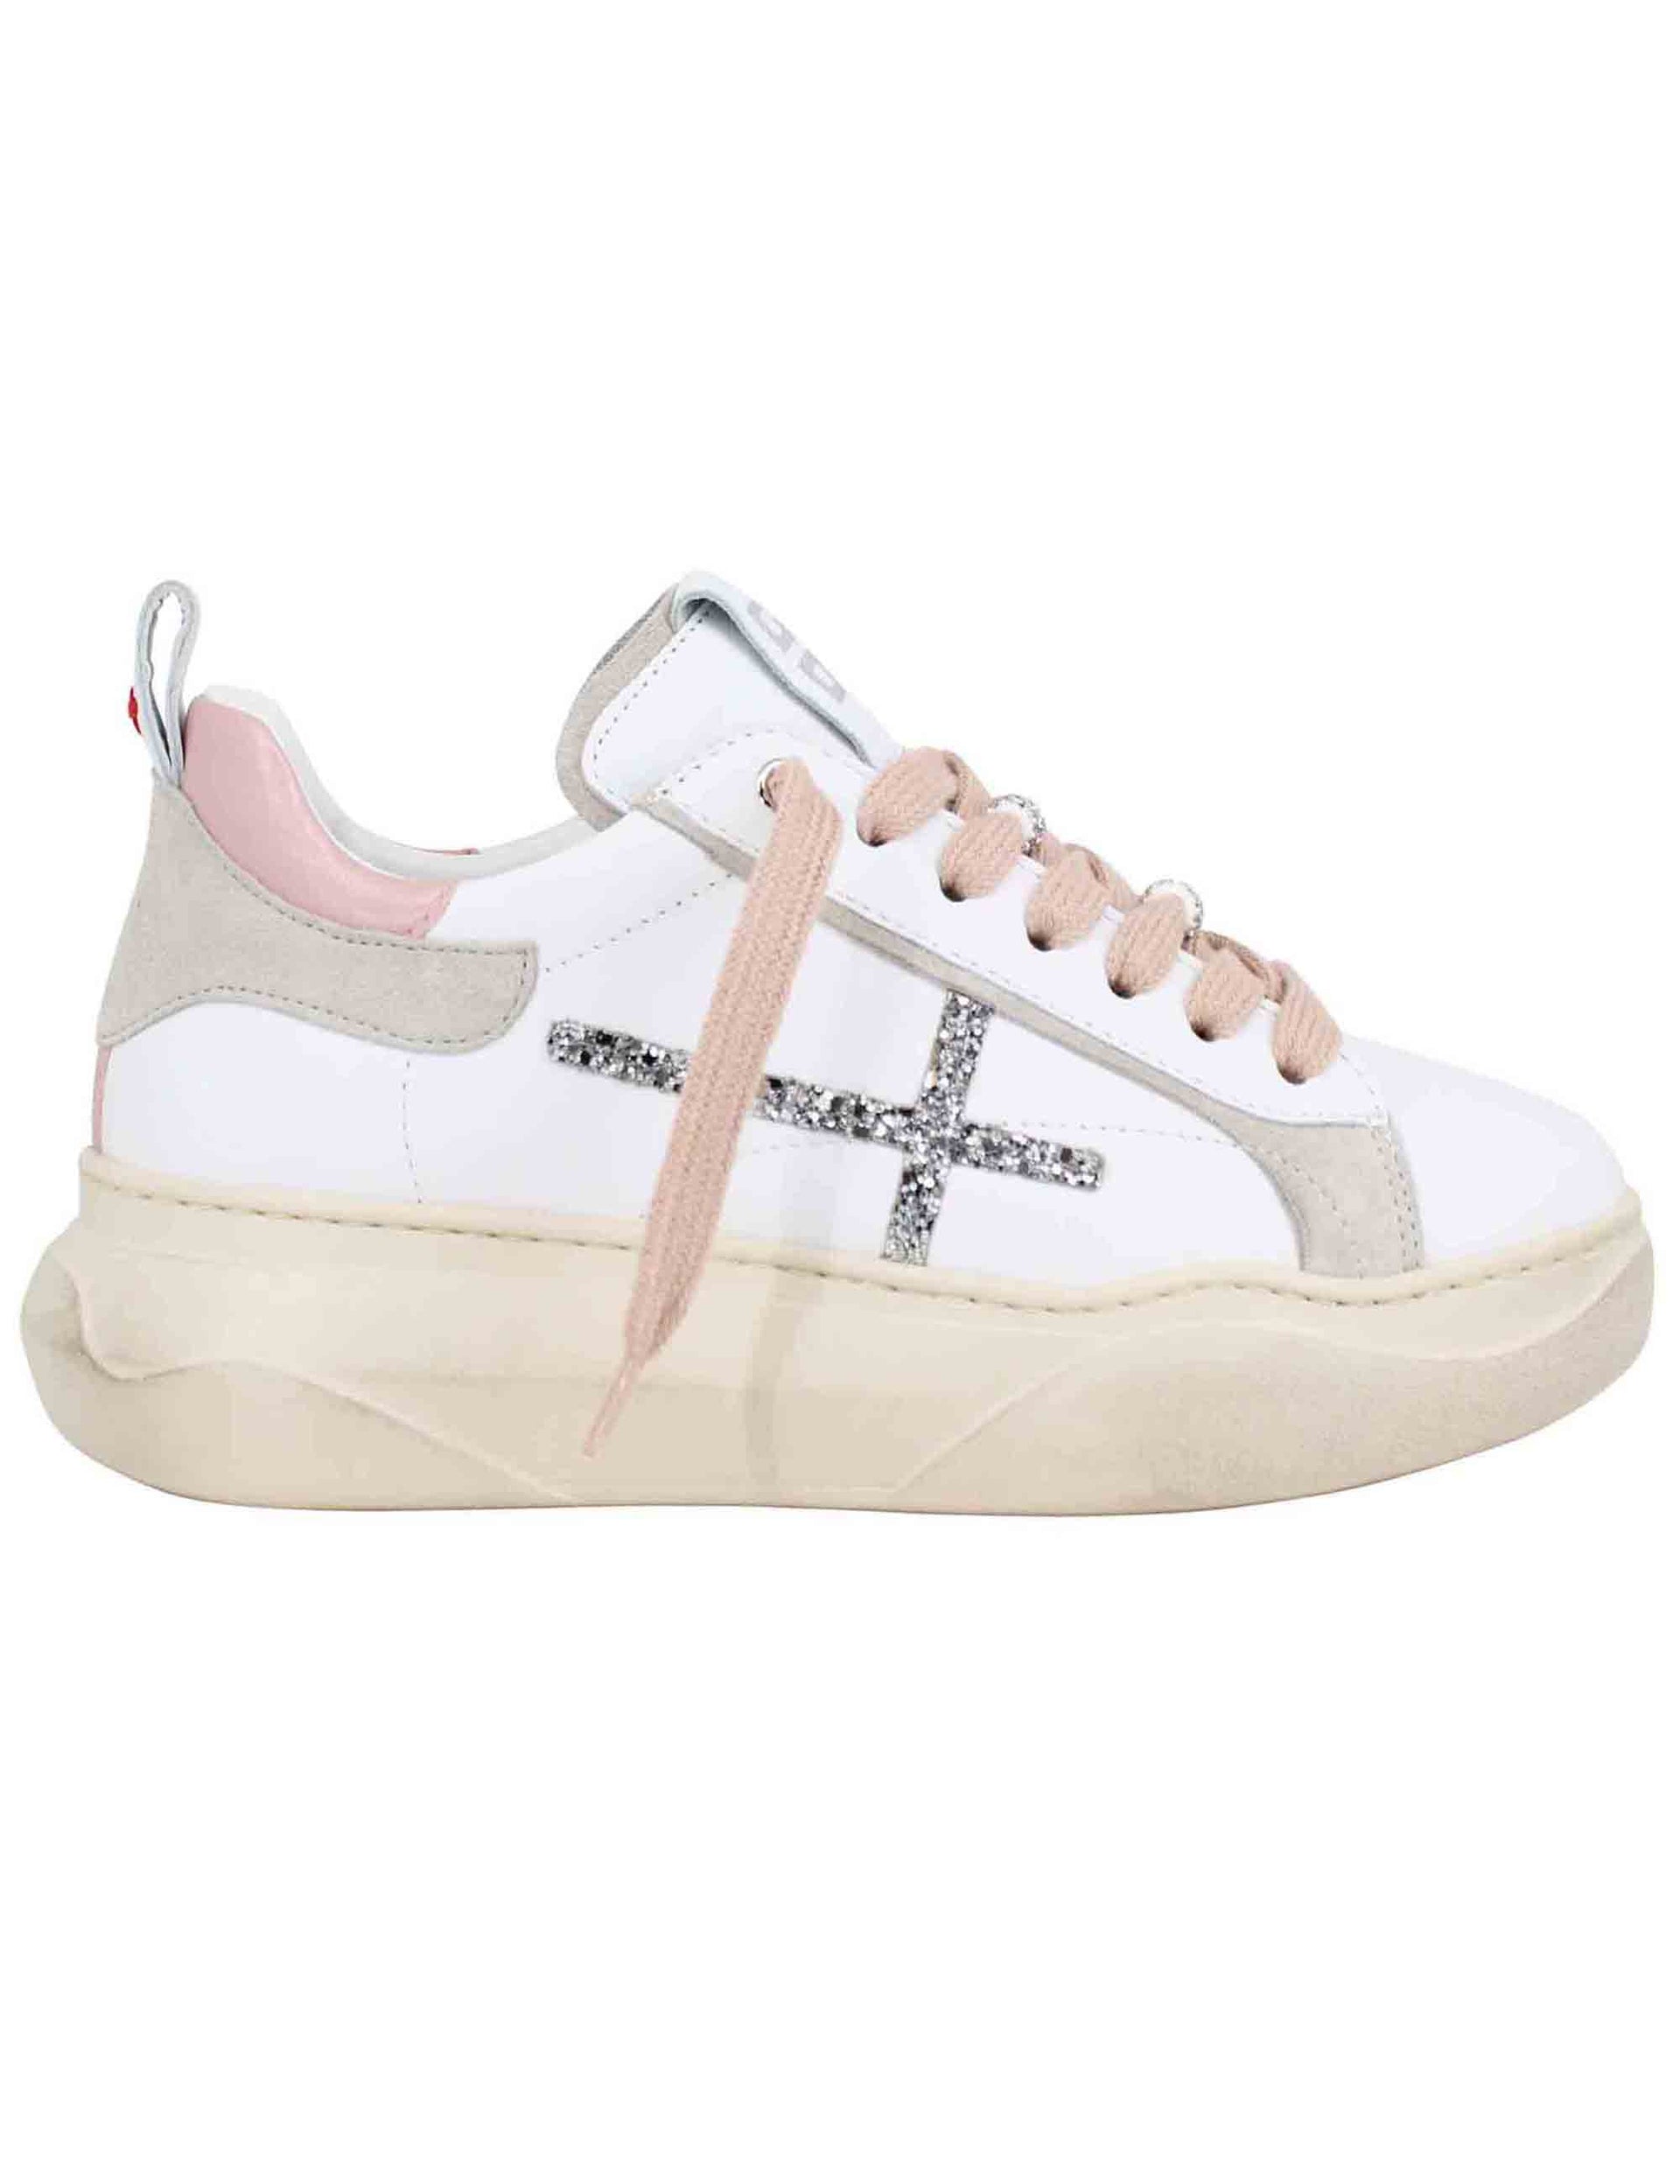 Women's white leather sneakers with contrasting inserts